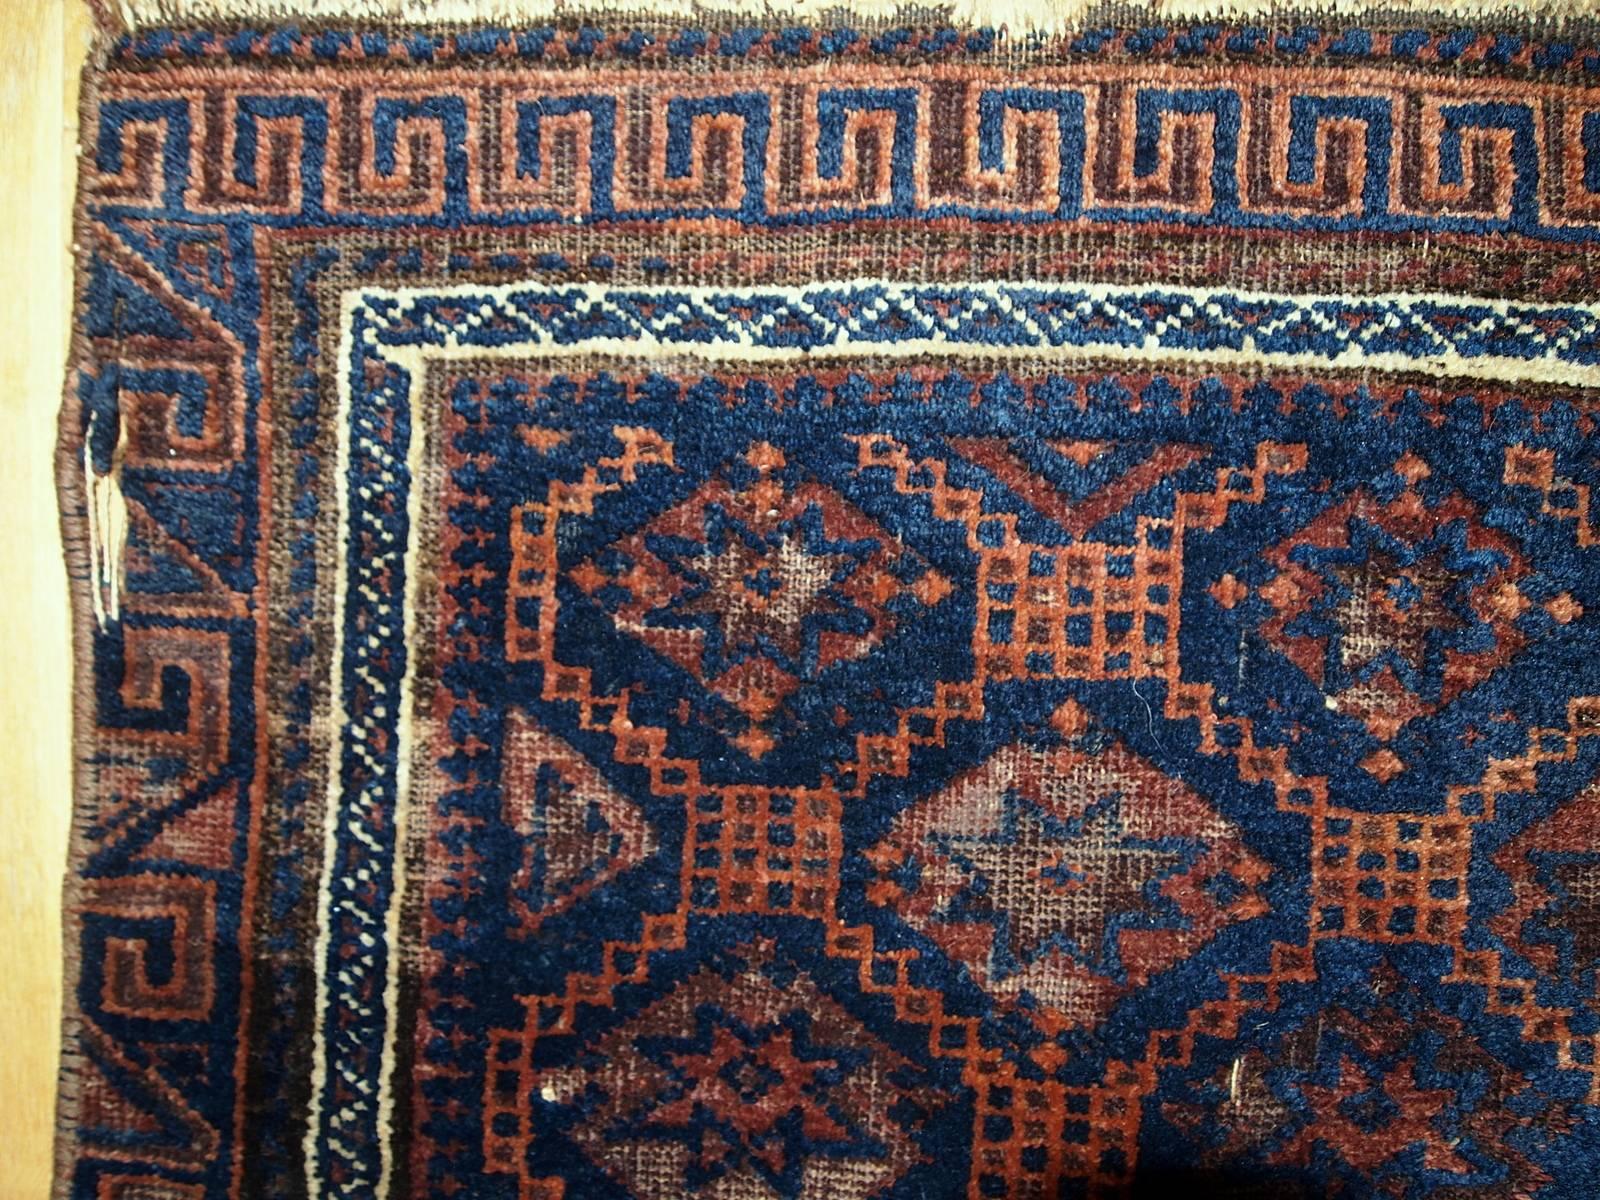 Antique handmade Afghan Baluch bag face. The rug has geometric pattern in diamond shaped figures with eight corners stars inside. Very unusual and nice border with geometric design as well. The combination of colors is lovely: night blue with rust